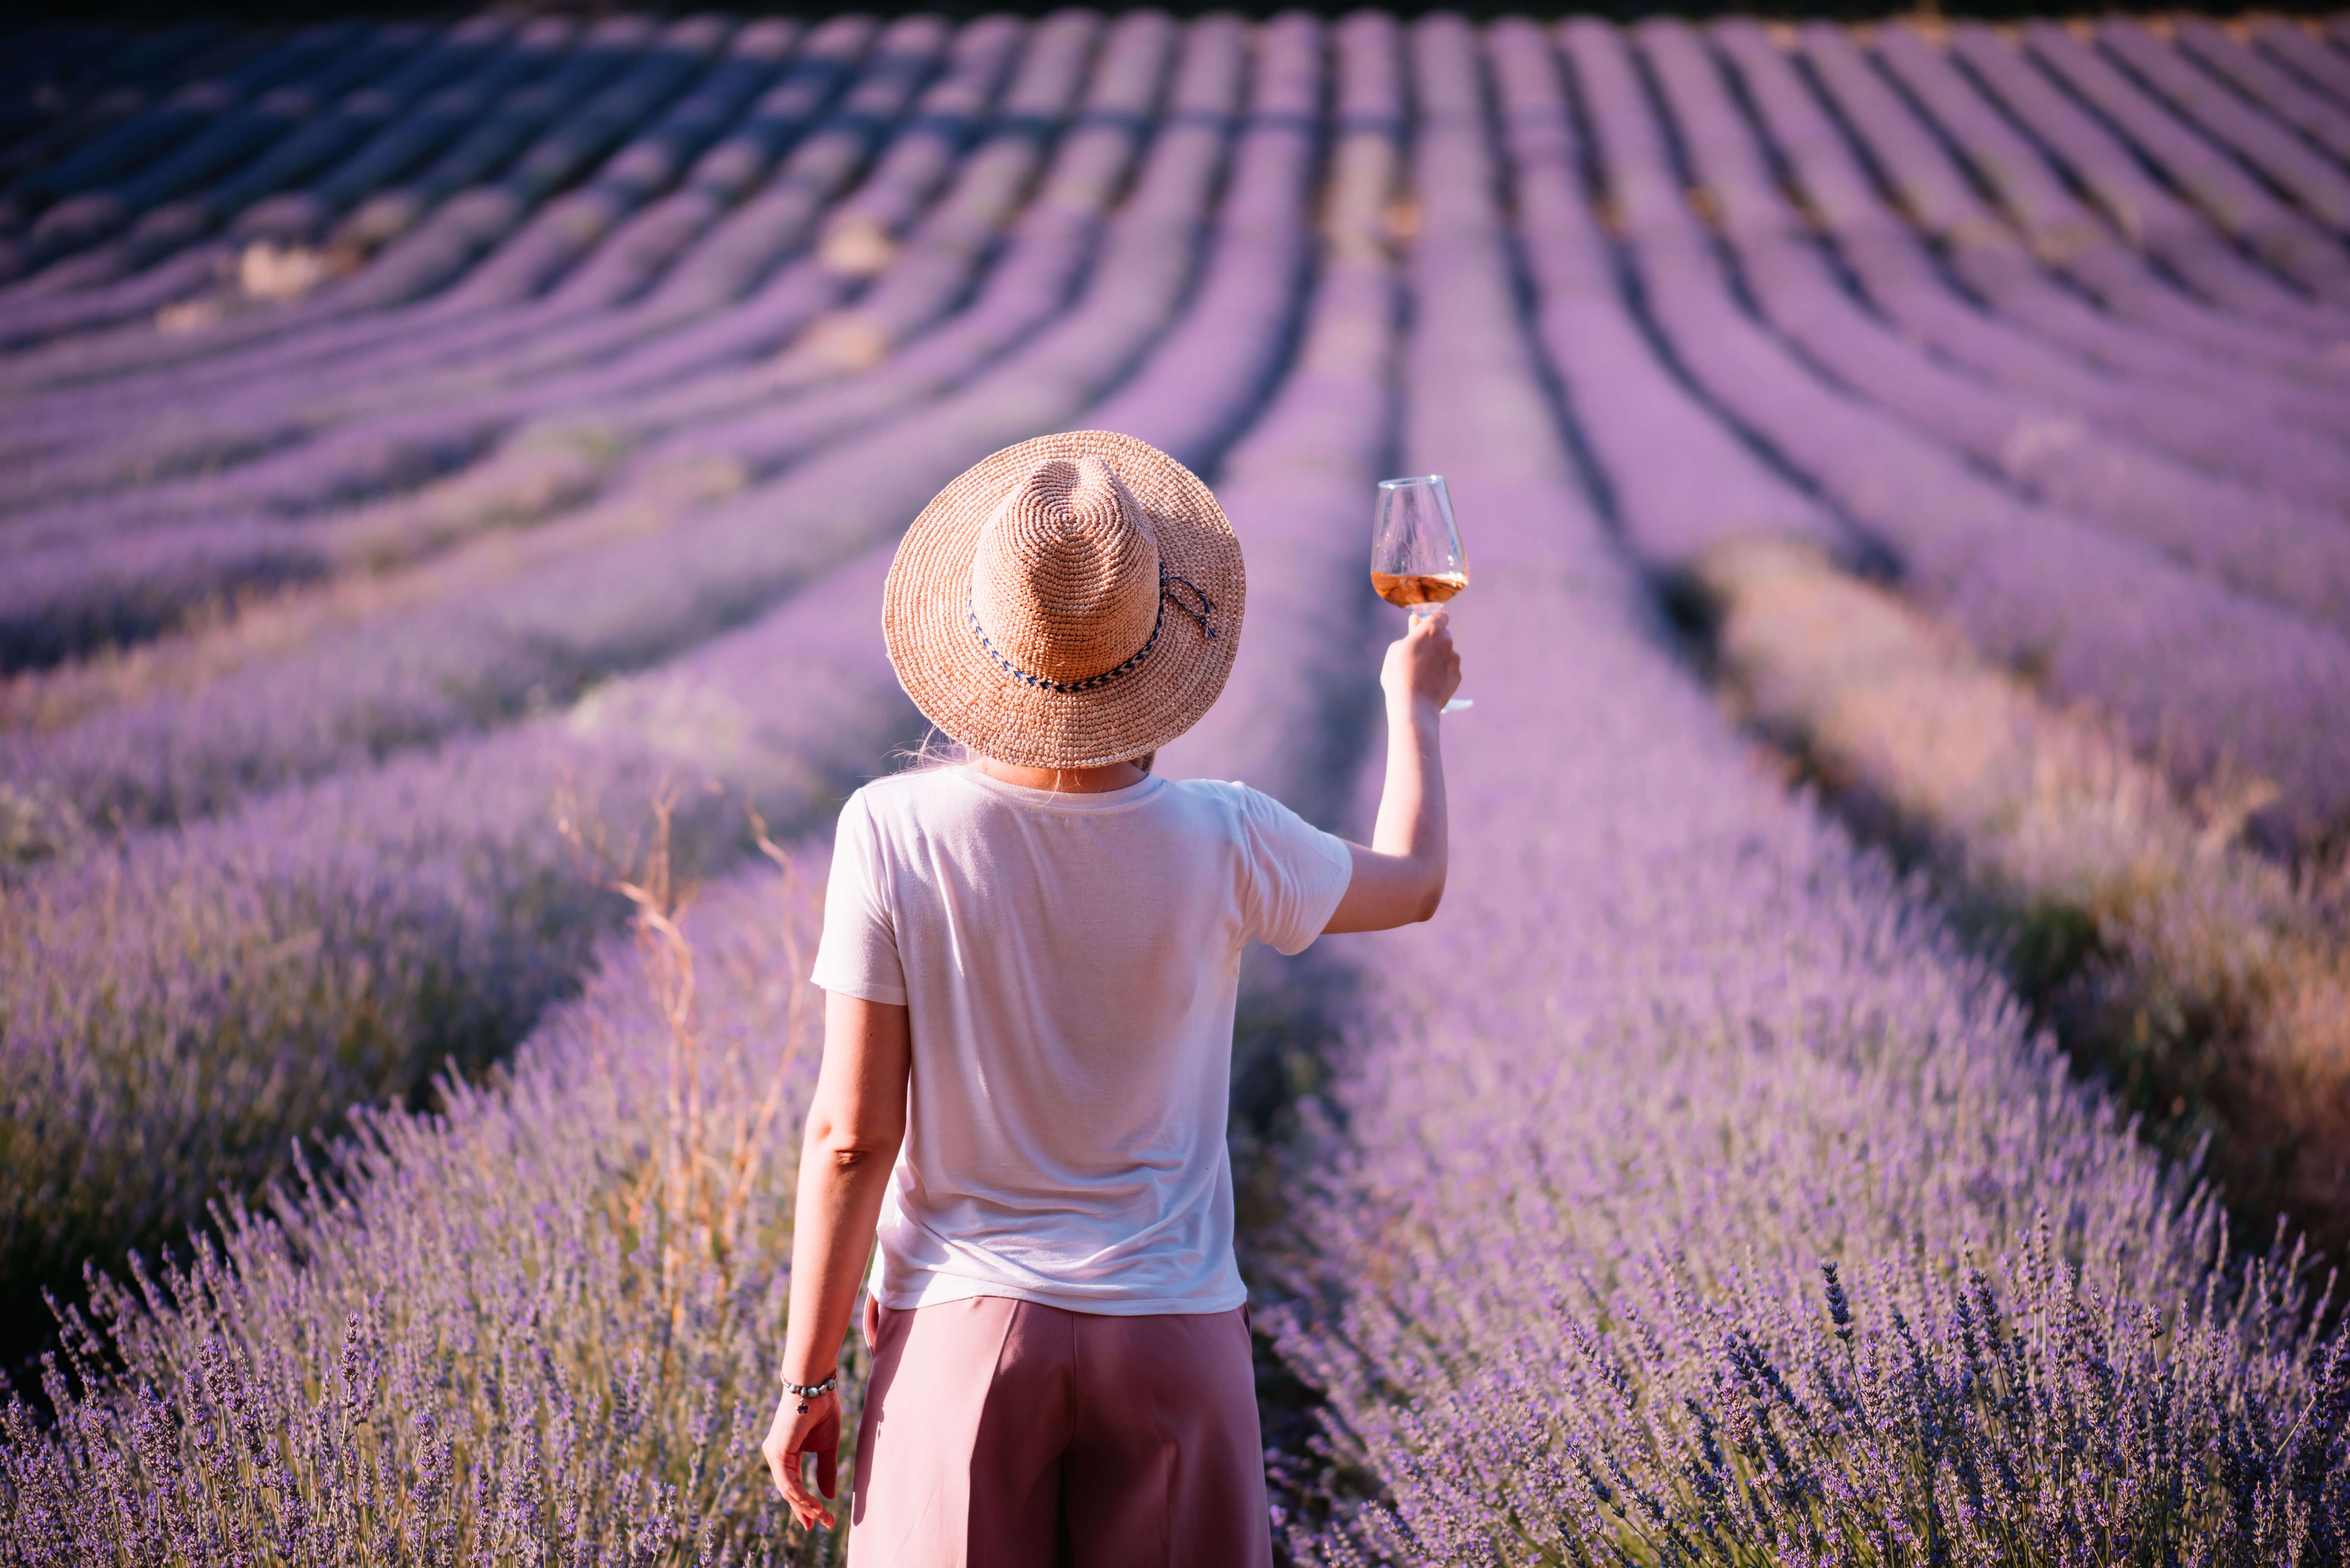 A woman holding wine glass amidst lavender field in Provence, France